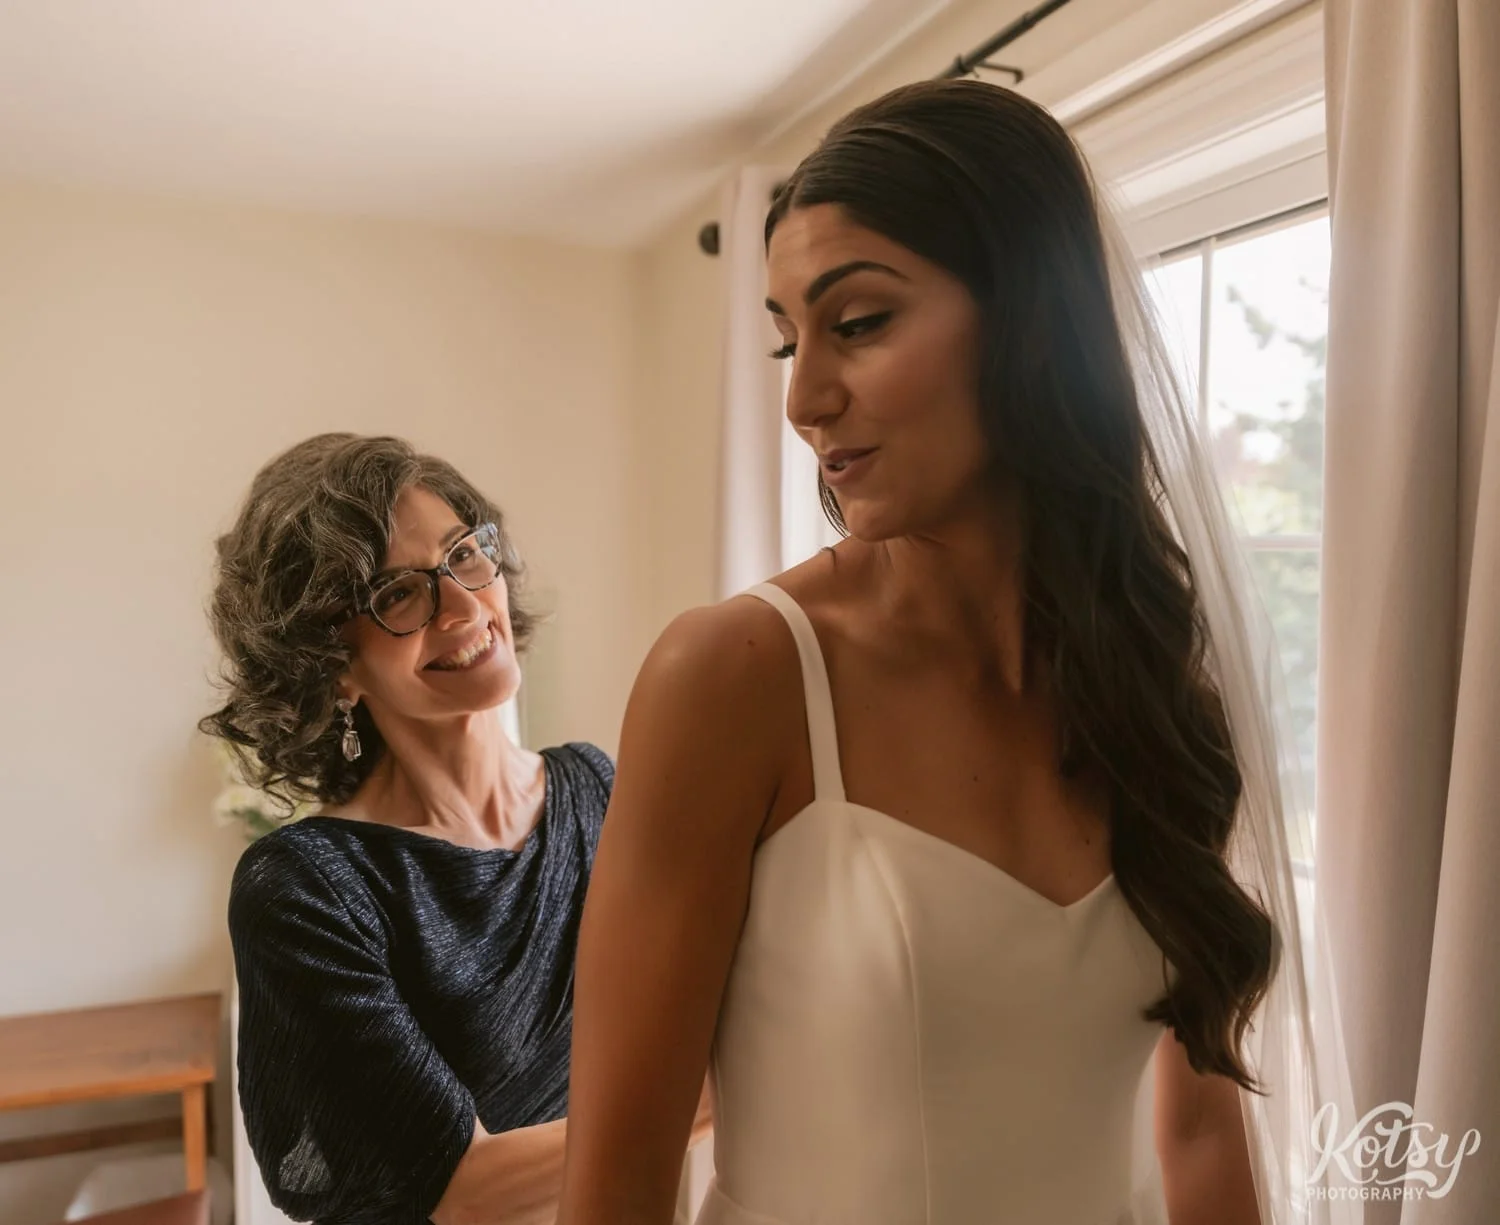 A mother smiles as she zips up her daughter's white wedding gown in a bedroom